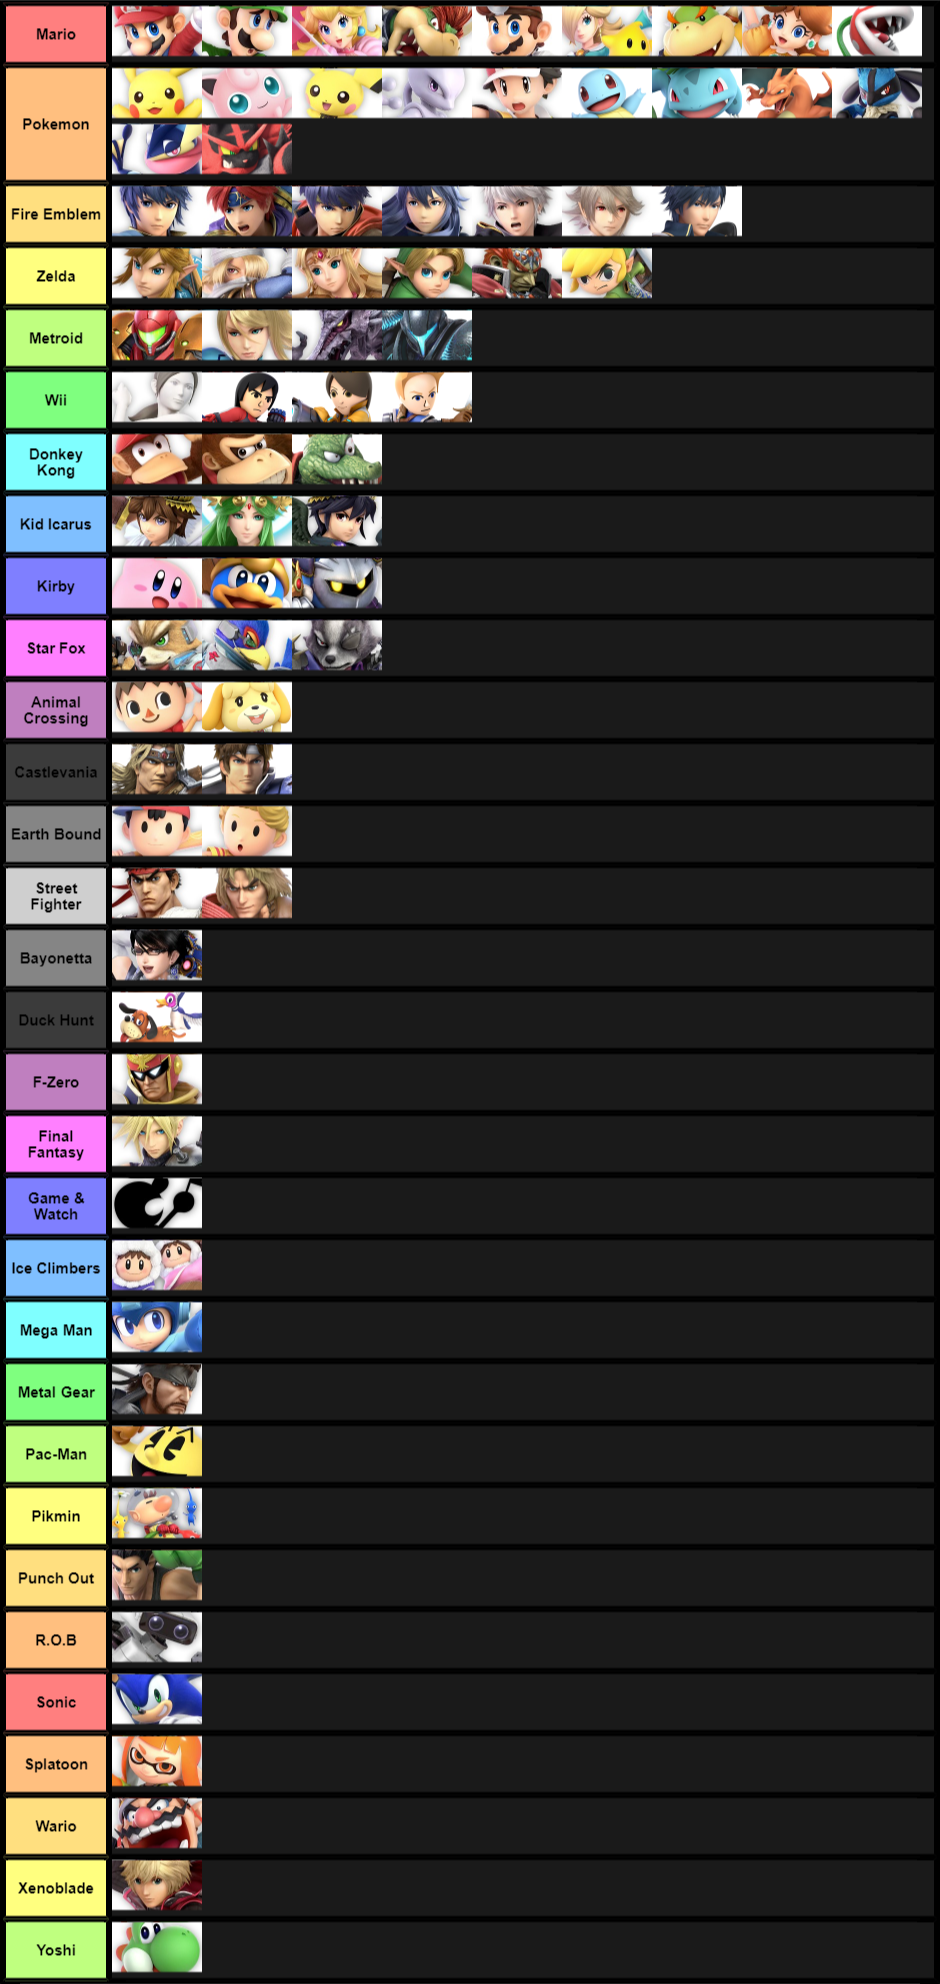 The Fighters Separated by Series (From Most Characters to Least in Alphabetical Order; Counting Pokemon Trainer as One Character)